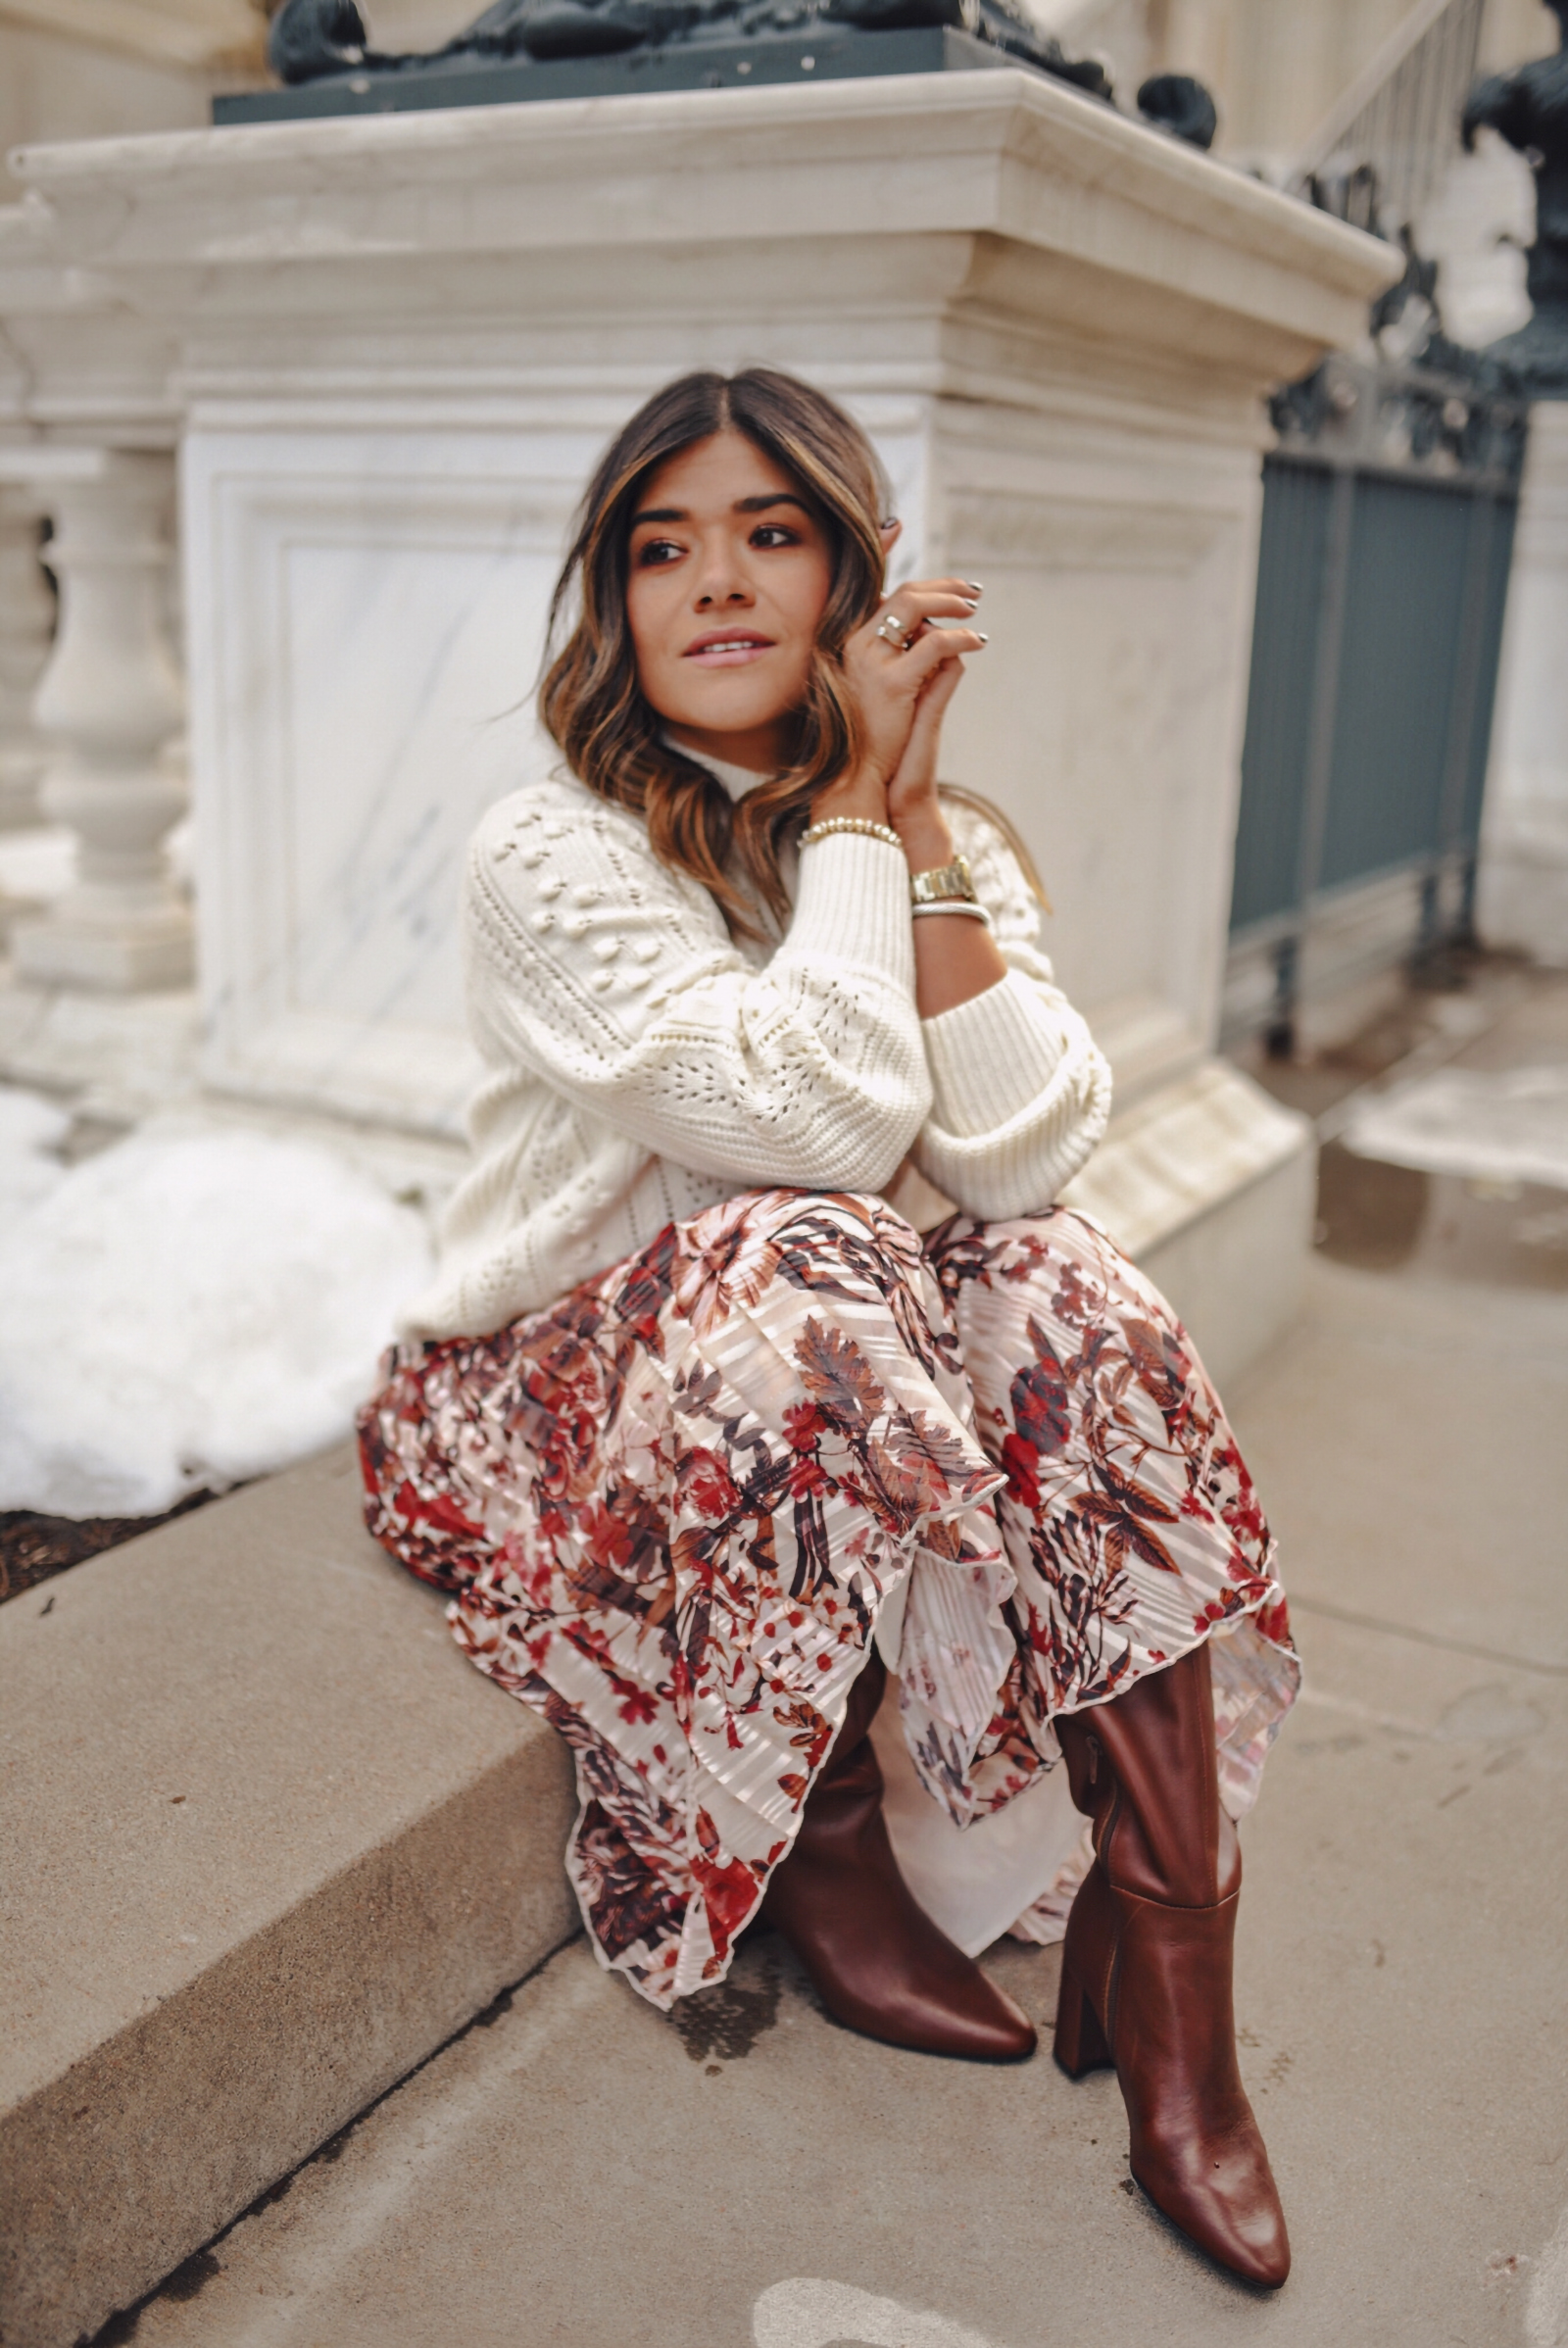 Carolina Hellal of Chic Talk wearing a Sezane knit sweater, h&m floral maxi skirt, Aersoles tall botos and Gucci Marmont crossbody bag